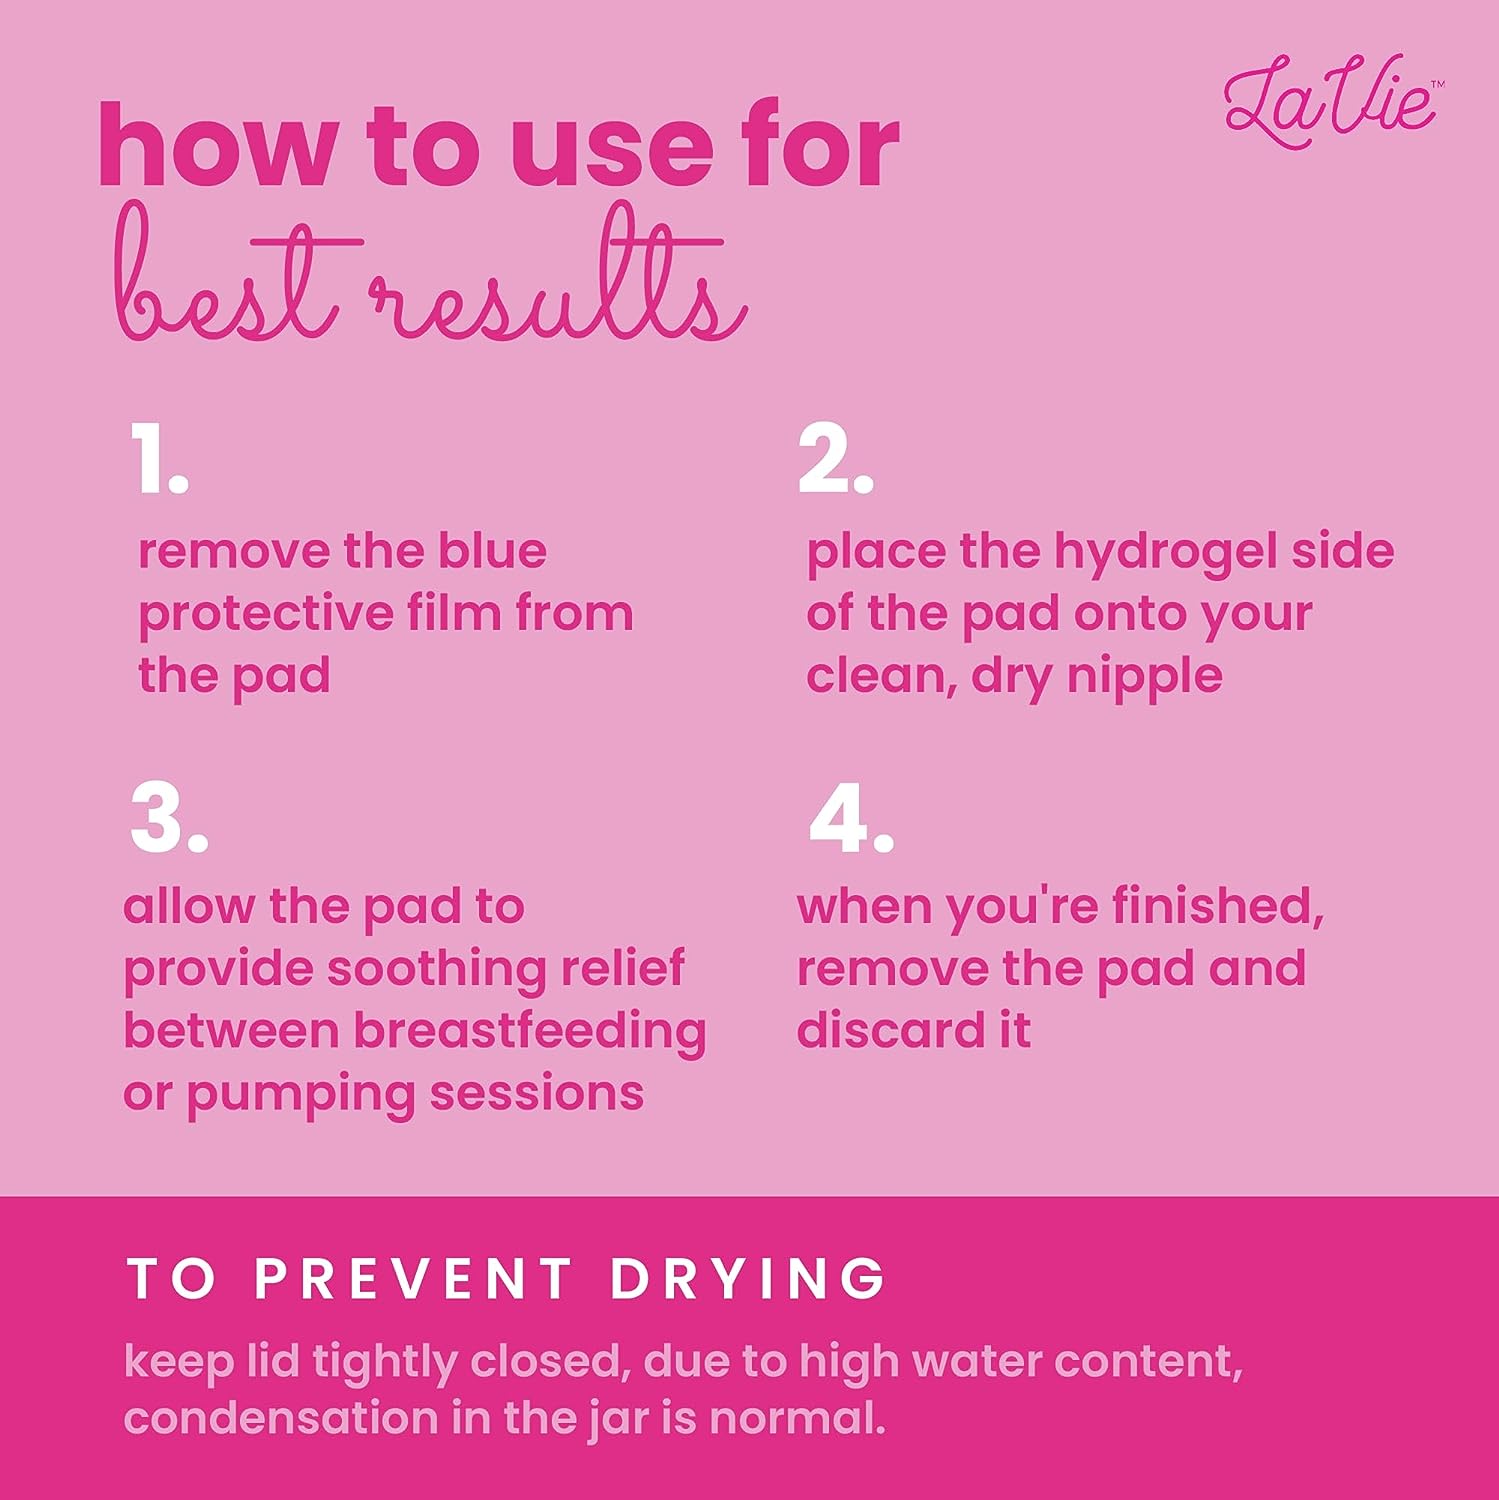 yay! So glad you love them! Hydrogel nipple pads are a